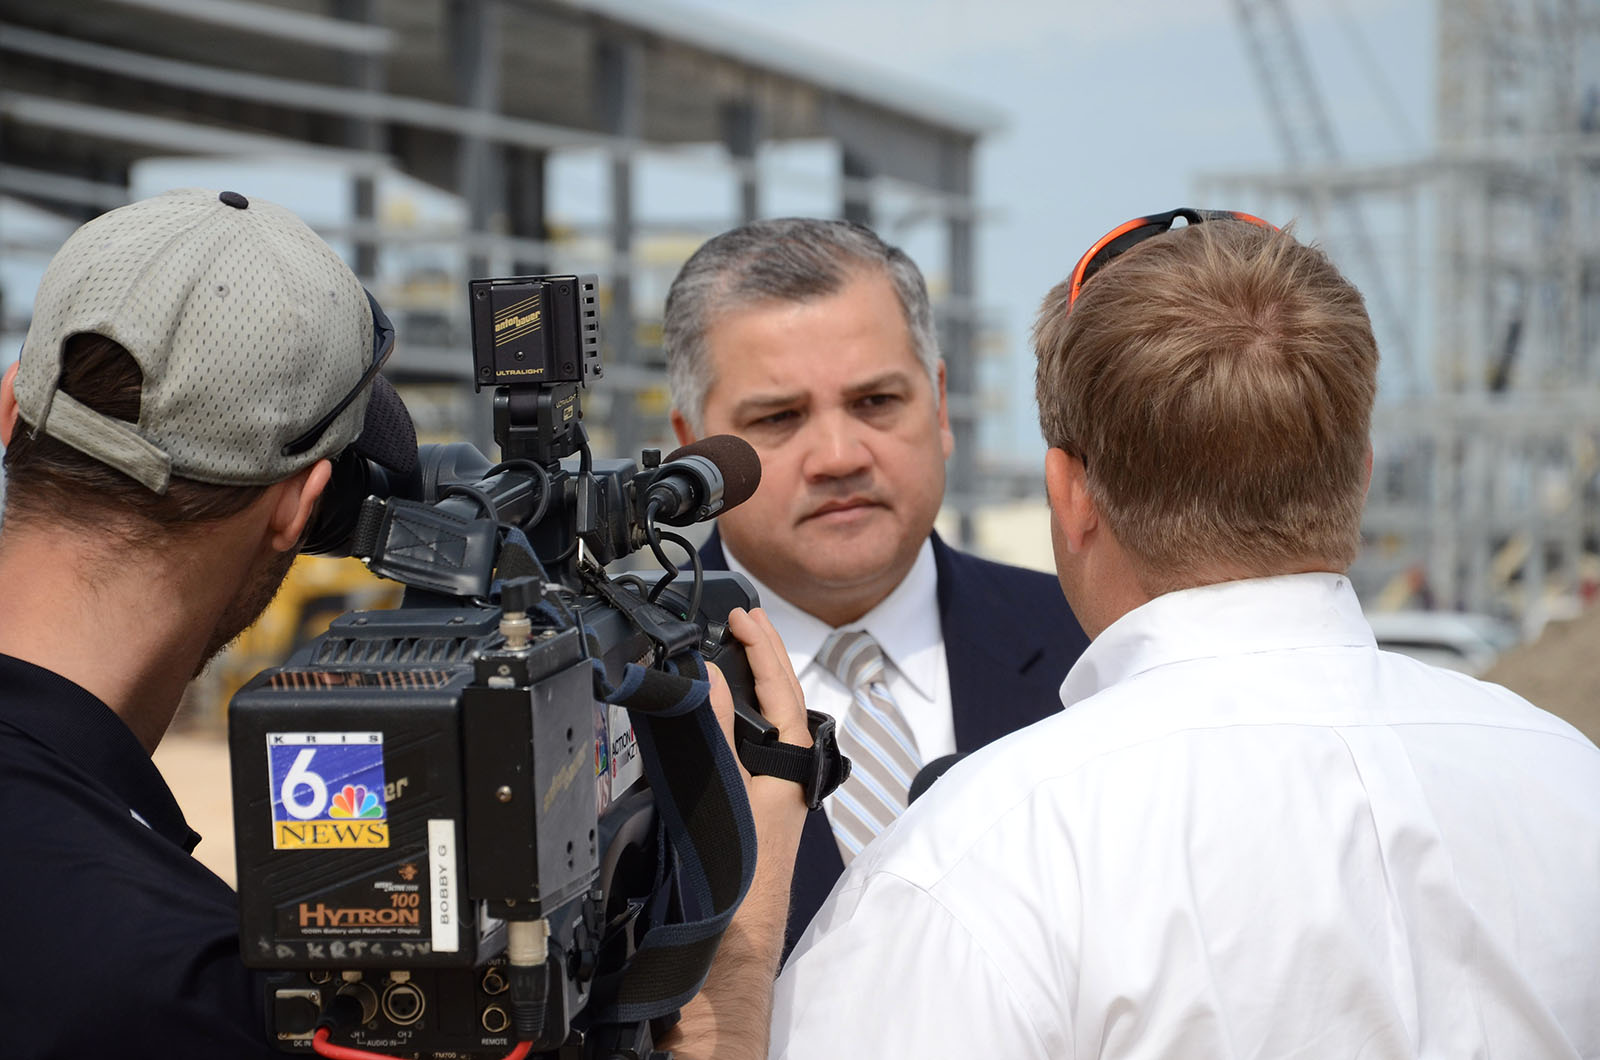 Dr. Escamilla being interviewed at news conference at industiral site